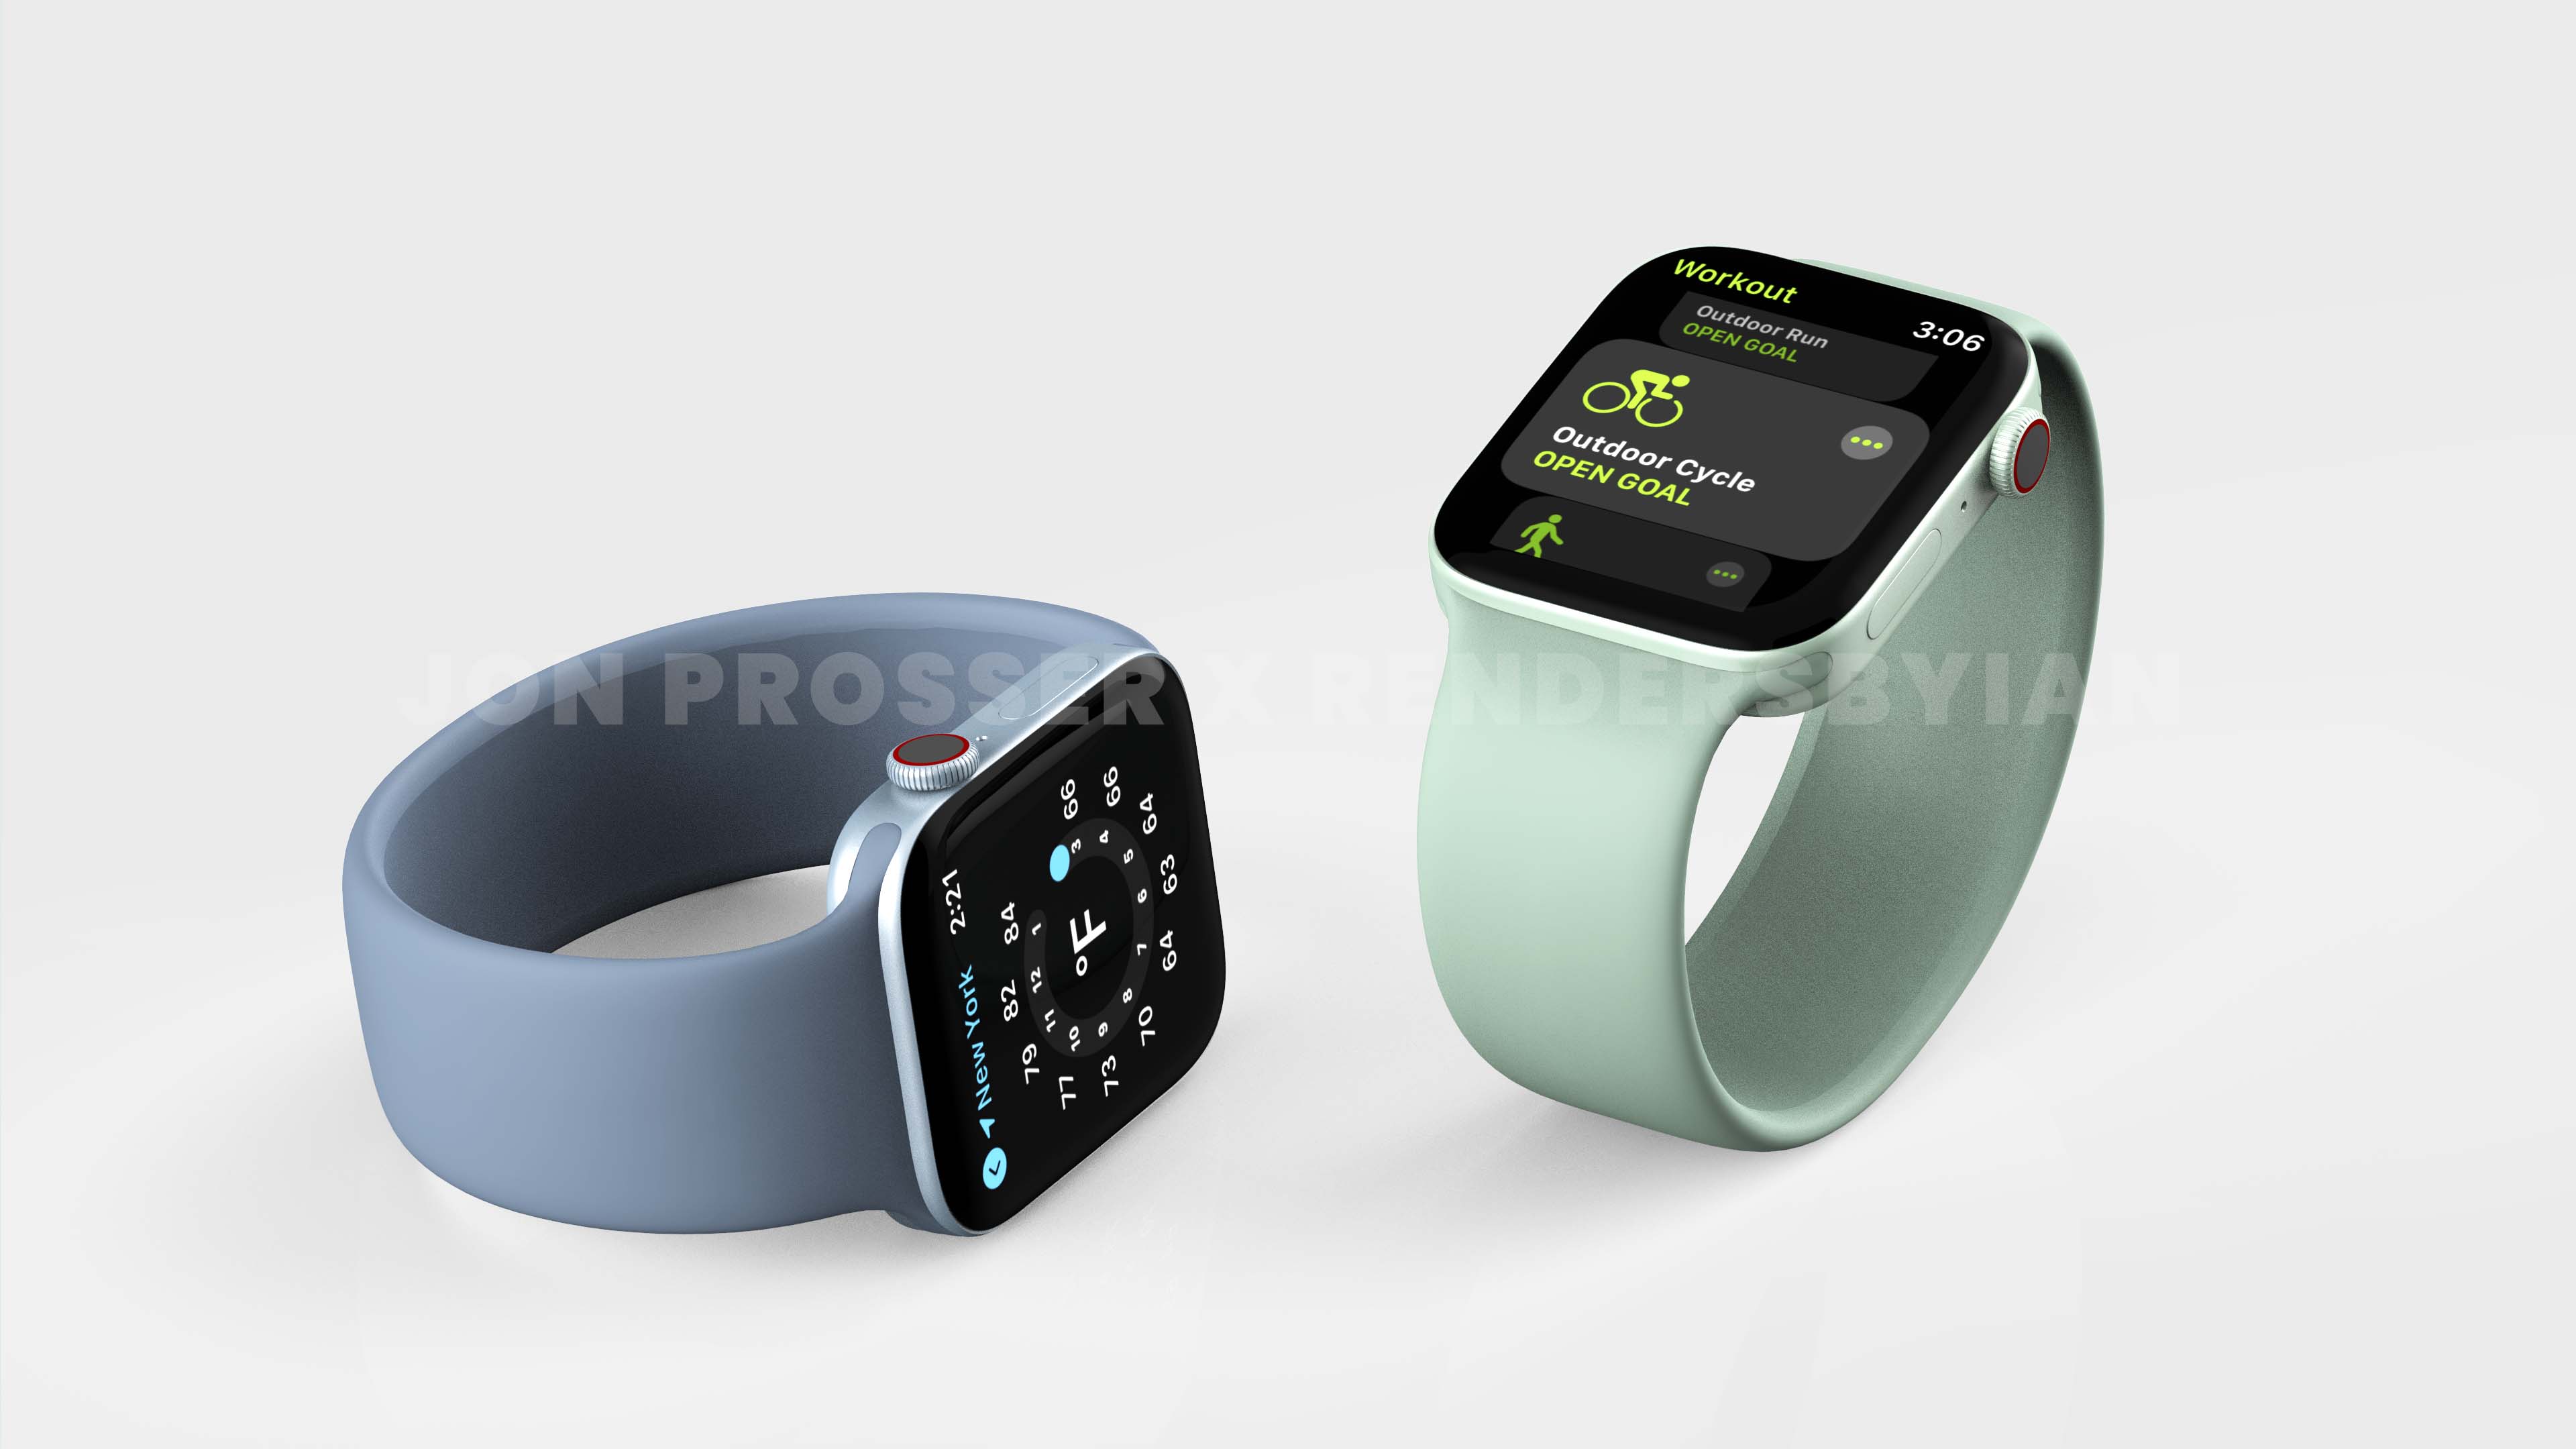 Renders of Apple Watch 7 prepared based on alleged leaked photos of the device